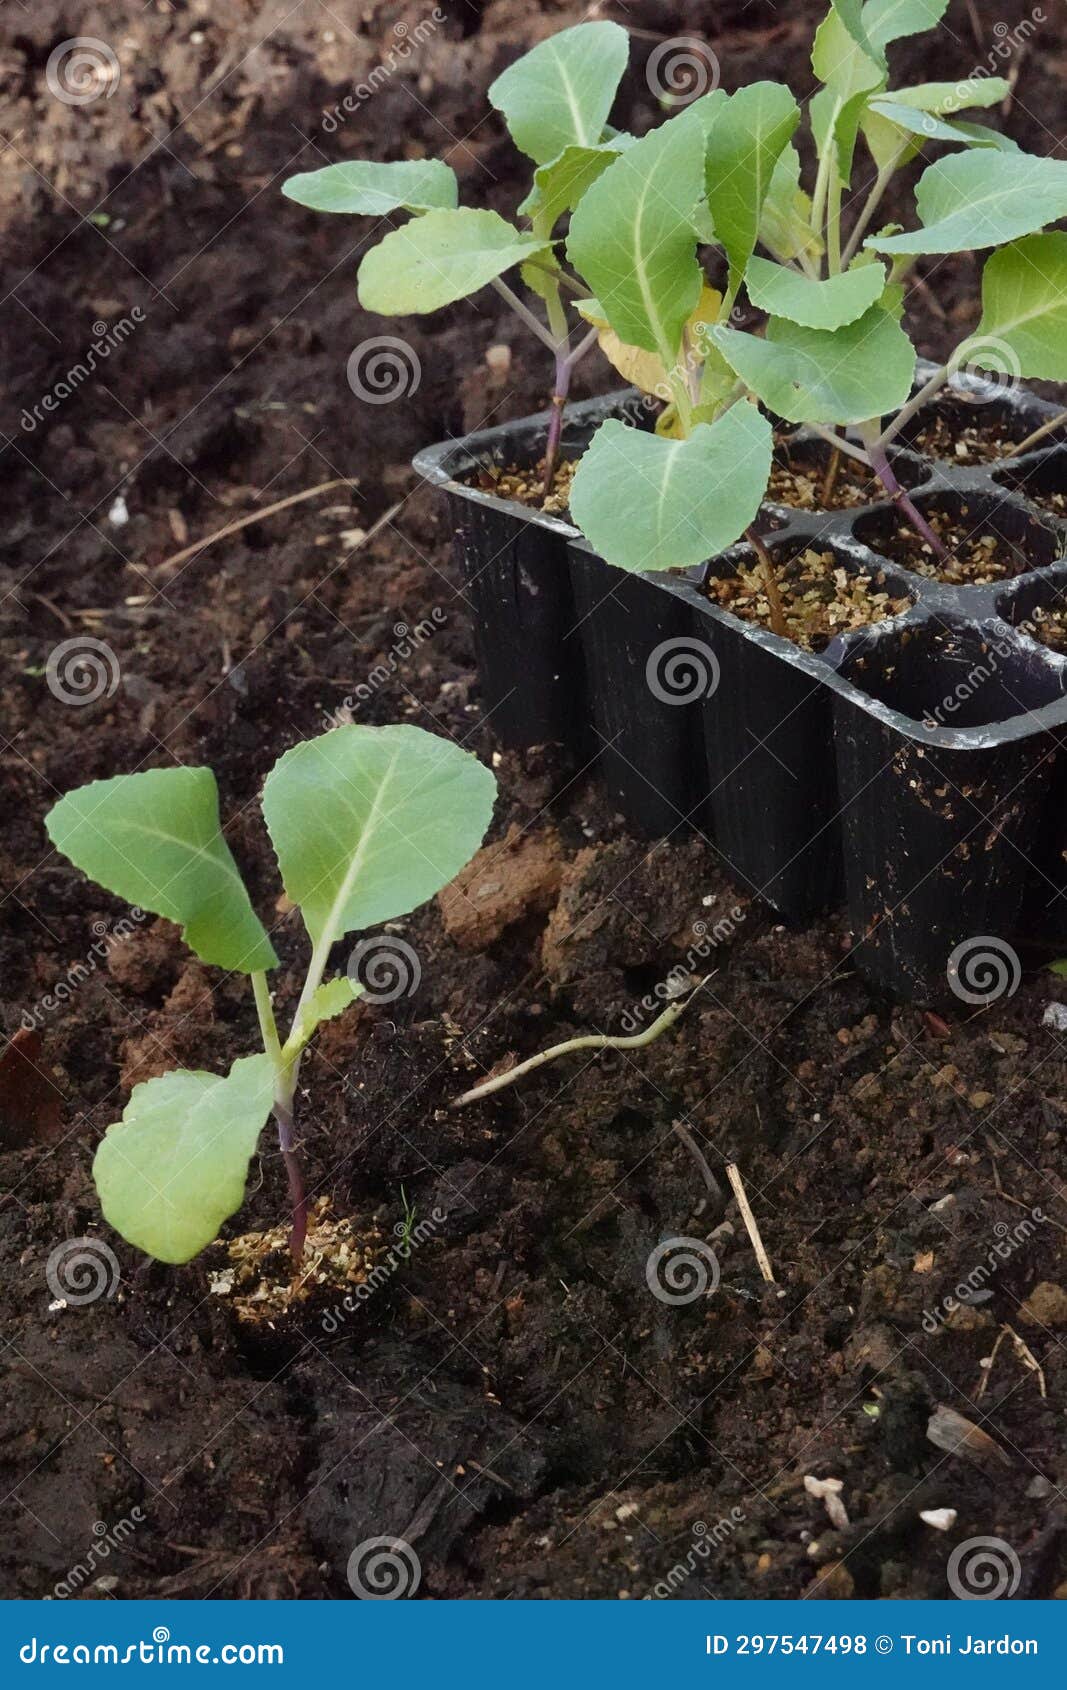 transplanting of young cauliflower plant in the vegetable garden. cauliflower seedbed and cruciferae in the raised bed on the